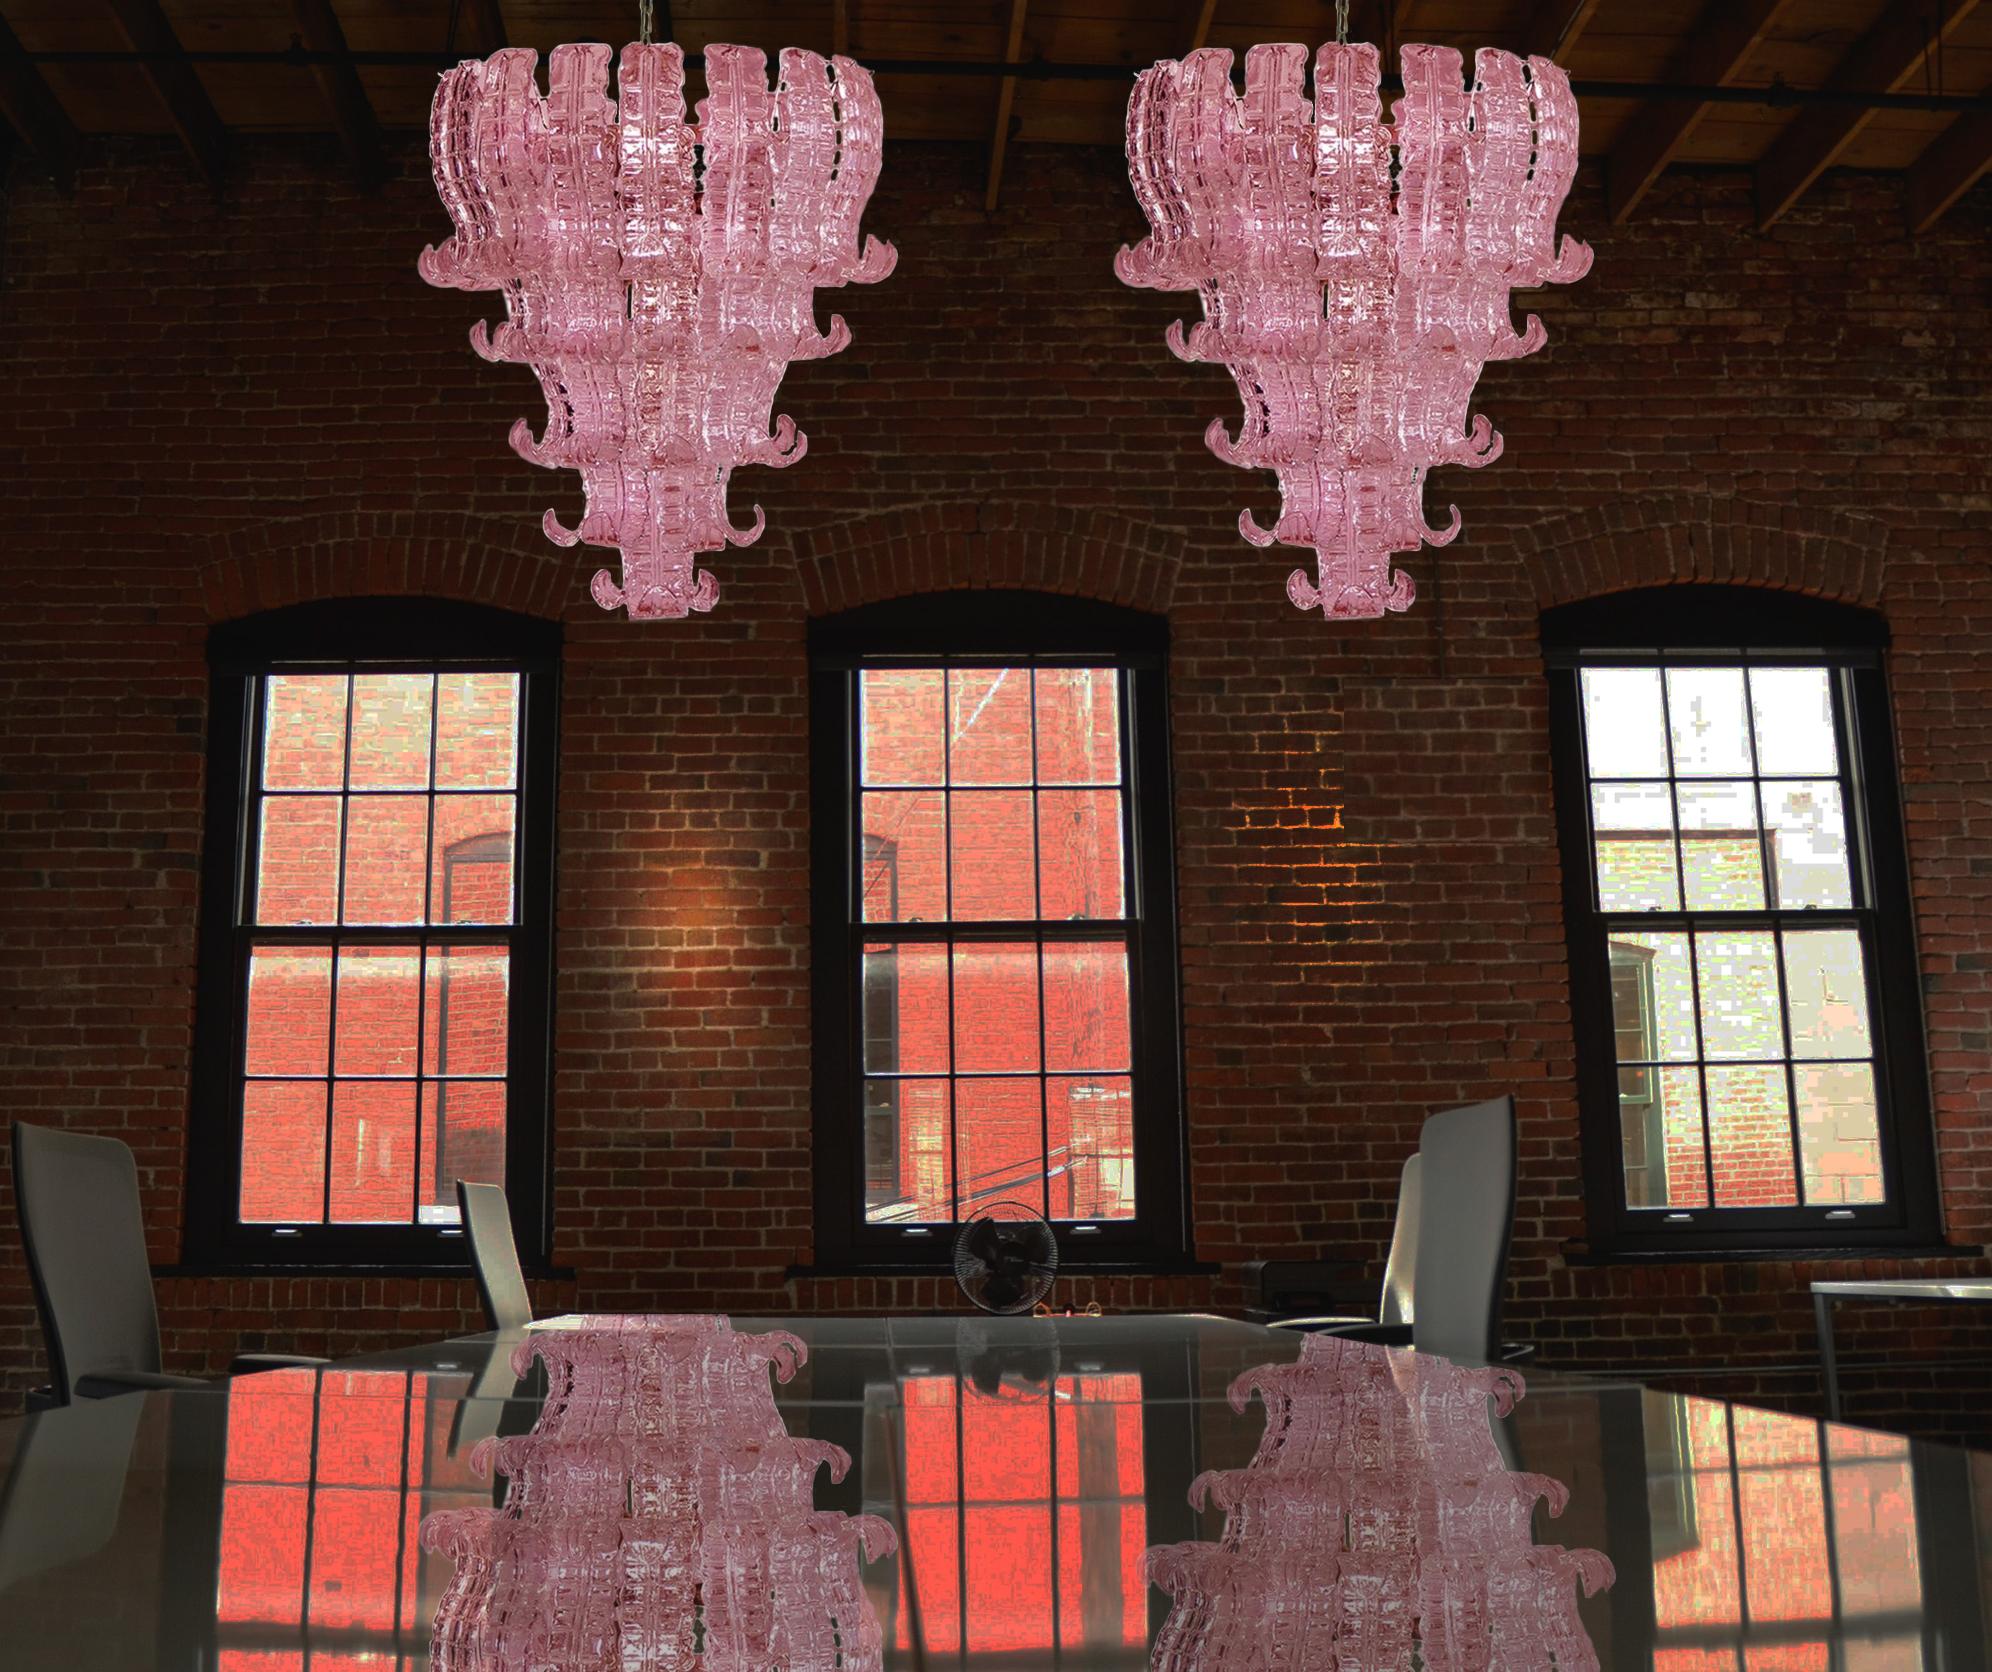 Beautiful and huge pair of Italian Murano chandeliers composed of 52 splendid pink glasses that give a very elegant look
Period: 1970s
Dimensions: 55.10 inches (140 cm) height with chain, 31.50 inches (80 cm) height without chain, 27.55 inches (70